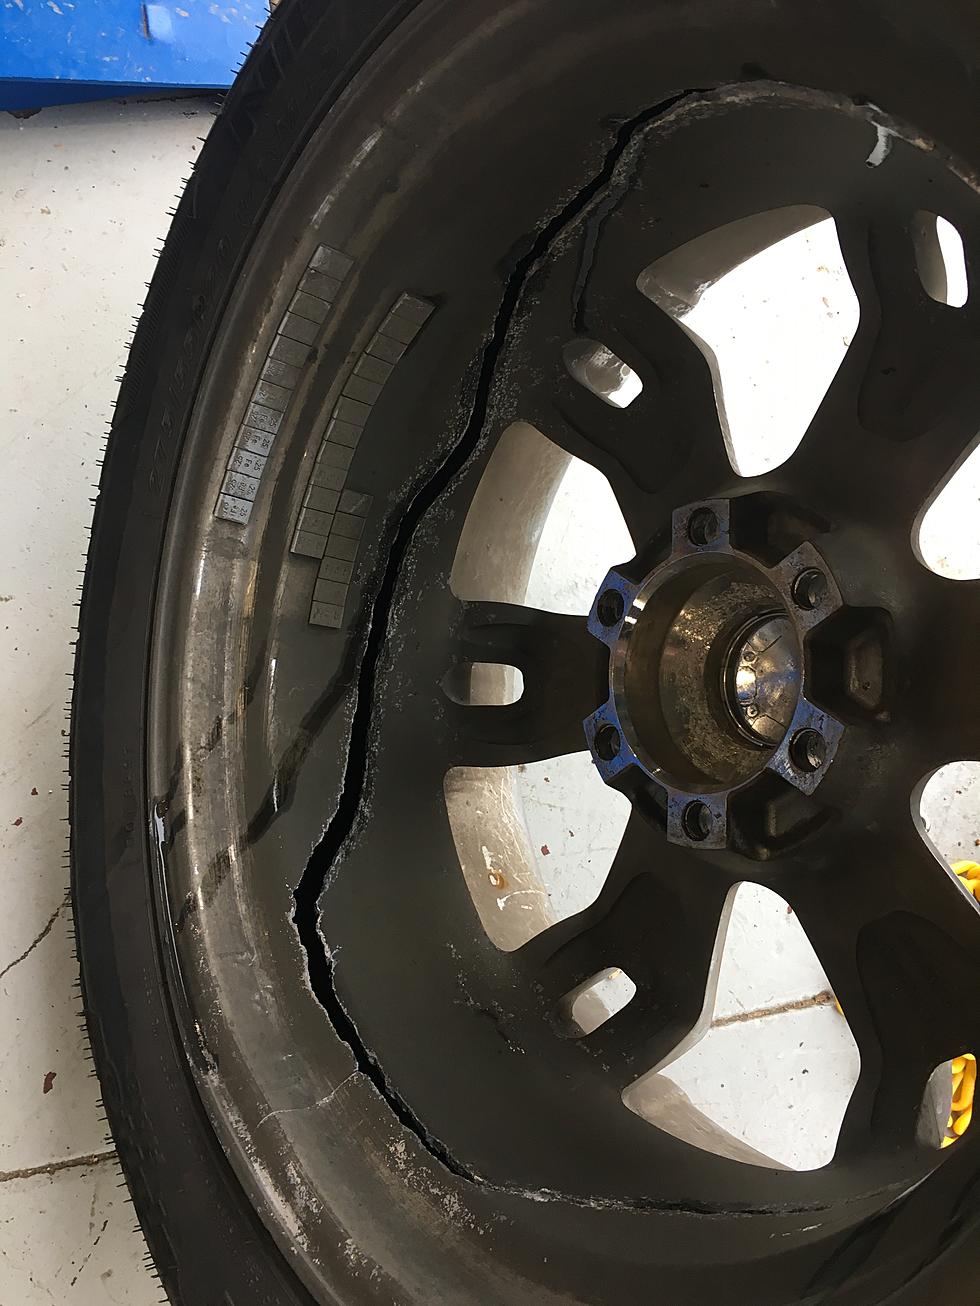 What On Earth Could Cause This To Happen To A Wheel?